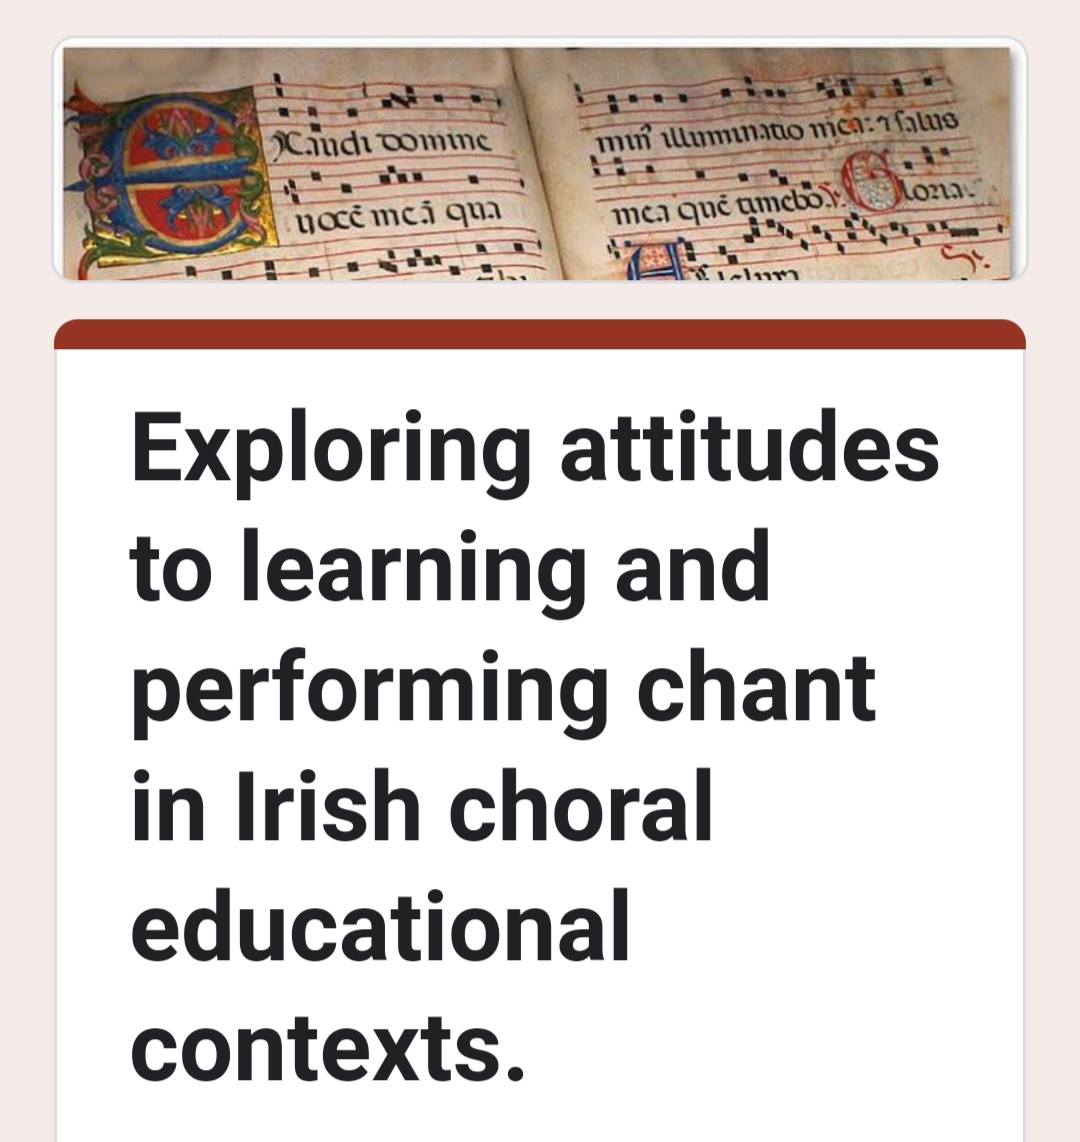 📣 Call for participants: Exploring attitudes to chant in Irish choral educational contexts. All involved in liturgical music are invited to complete a short questionnaire, with the option to participate in focus group: forms.gle/eHZENk6jxNf8kC… @mtu_csm @Music_DCU @tcddublin